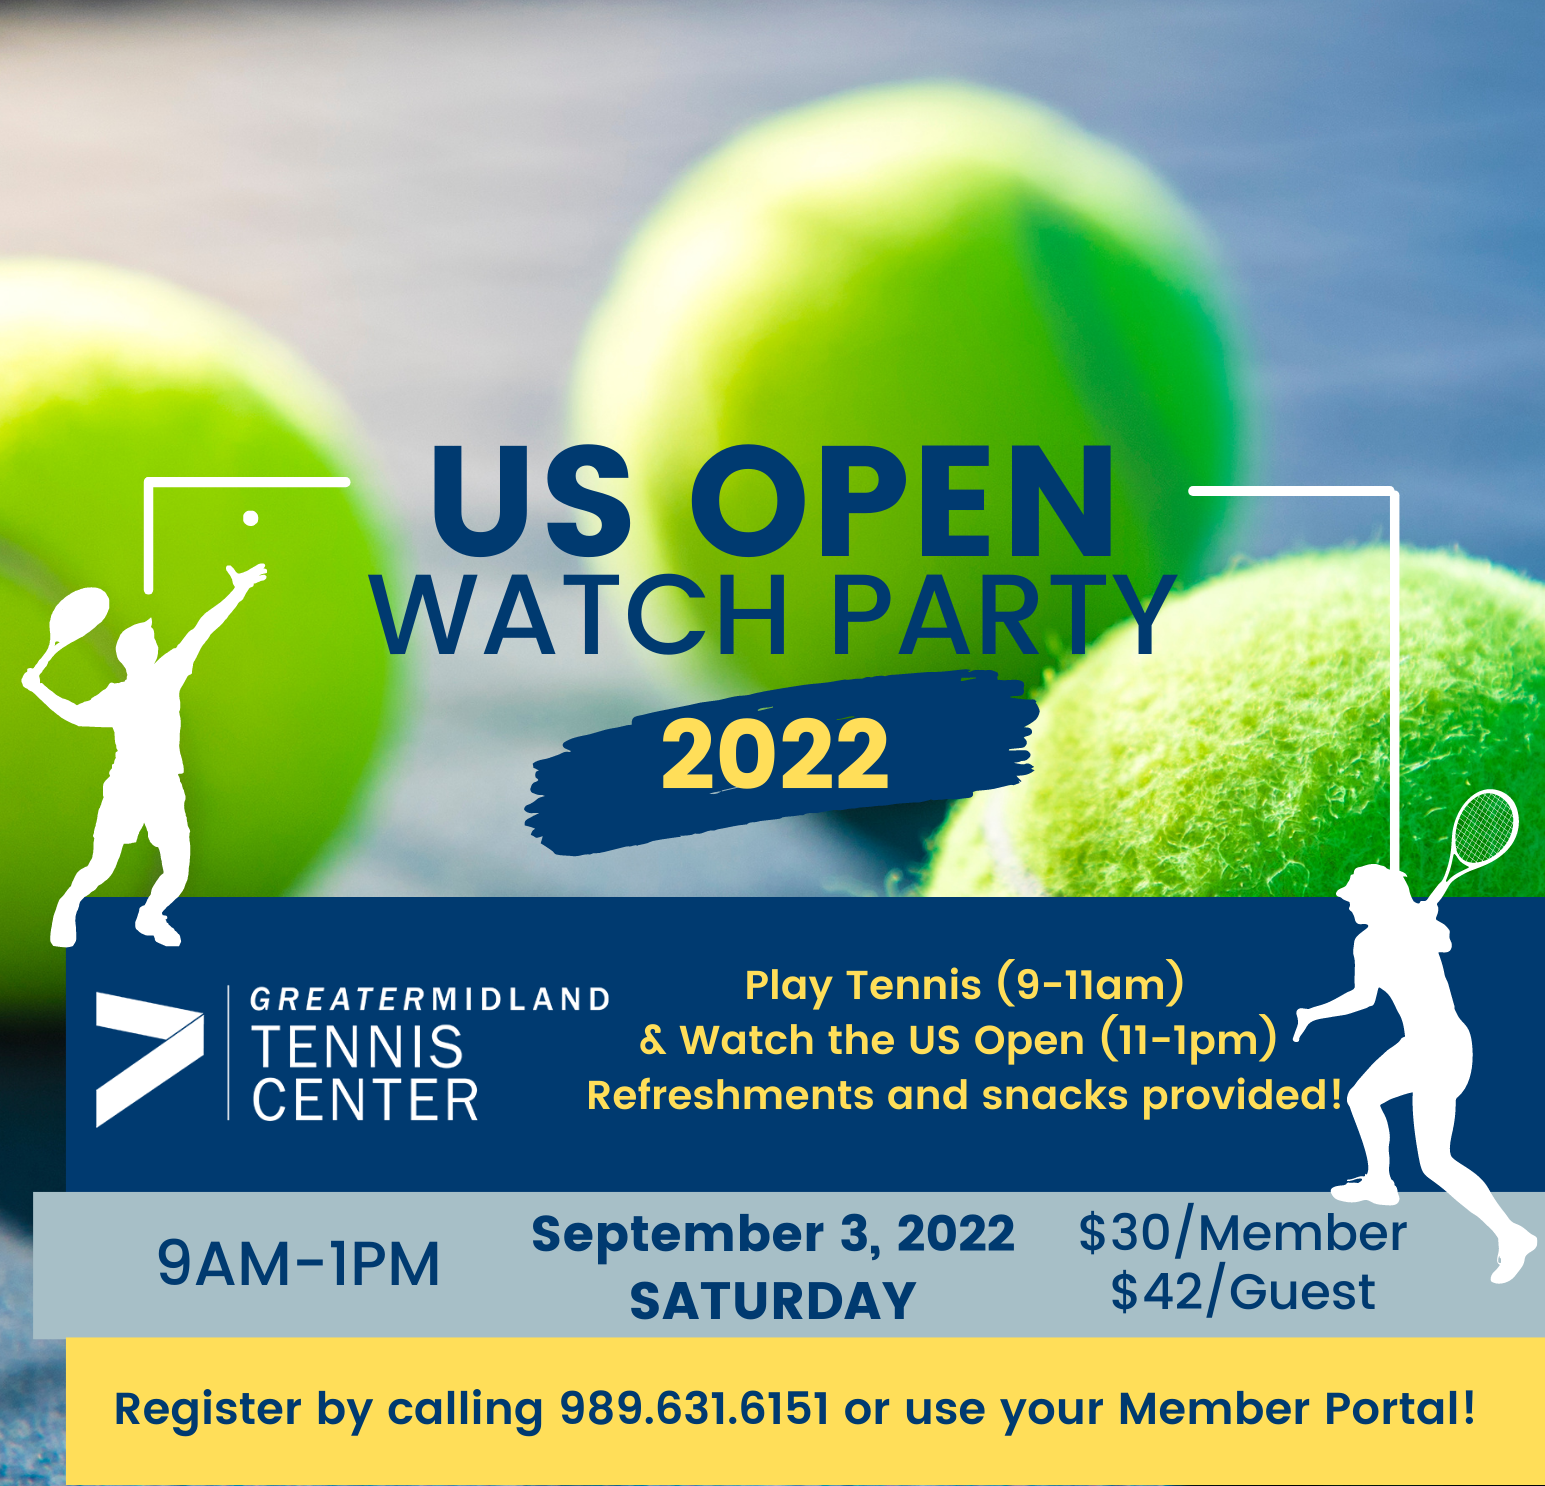 US Open Watch Party — Greater Midland